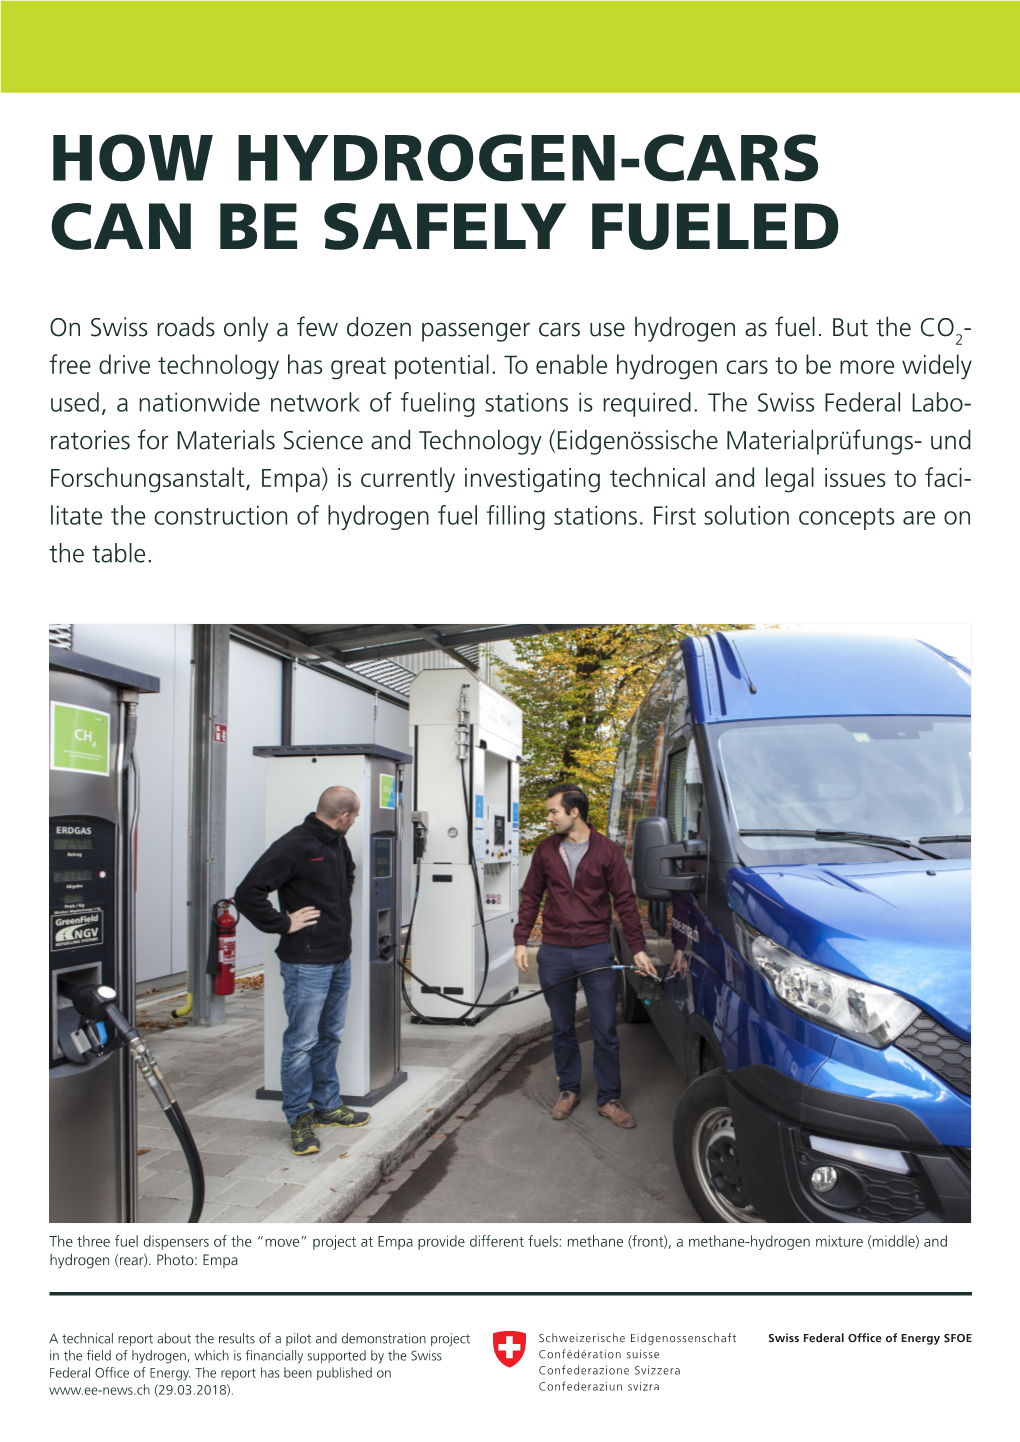 How Hydrogen-Cars Can Be Safely Fueled